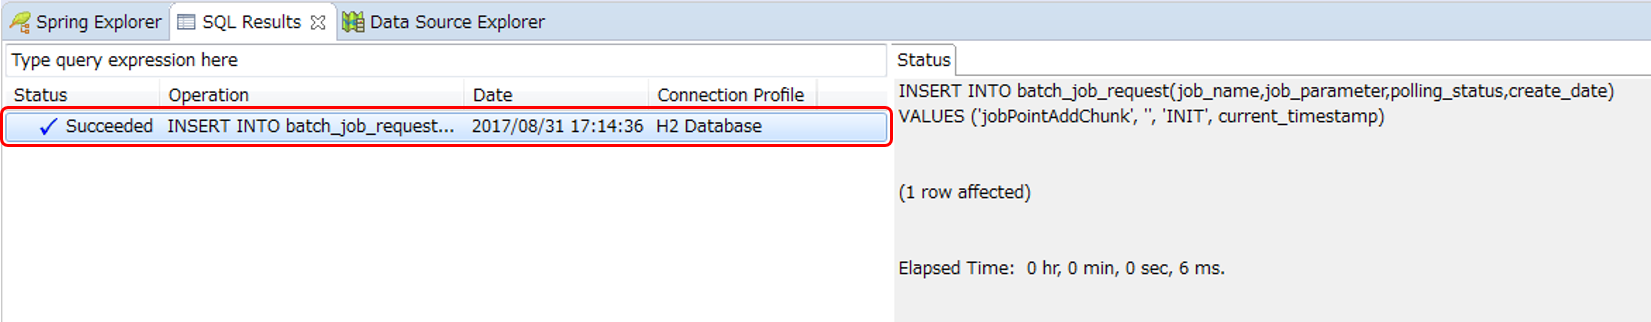 Confirm SQL Results